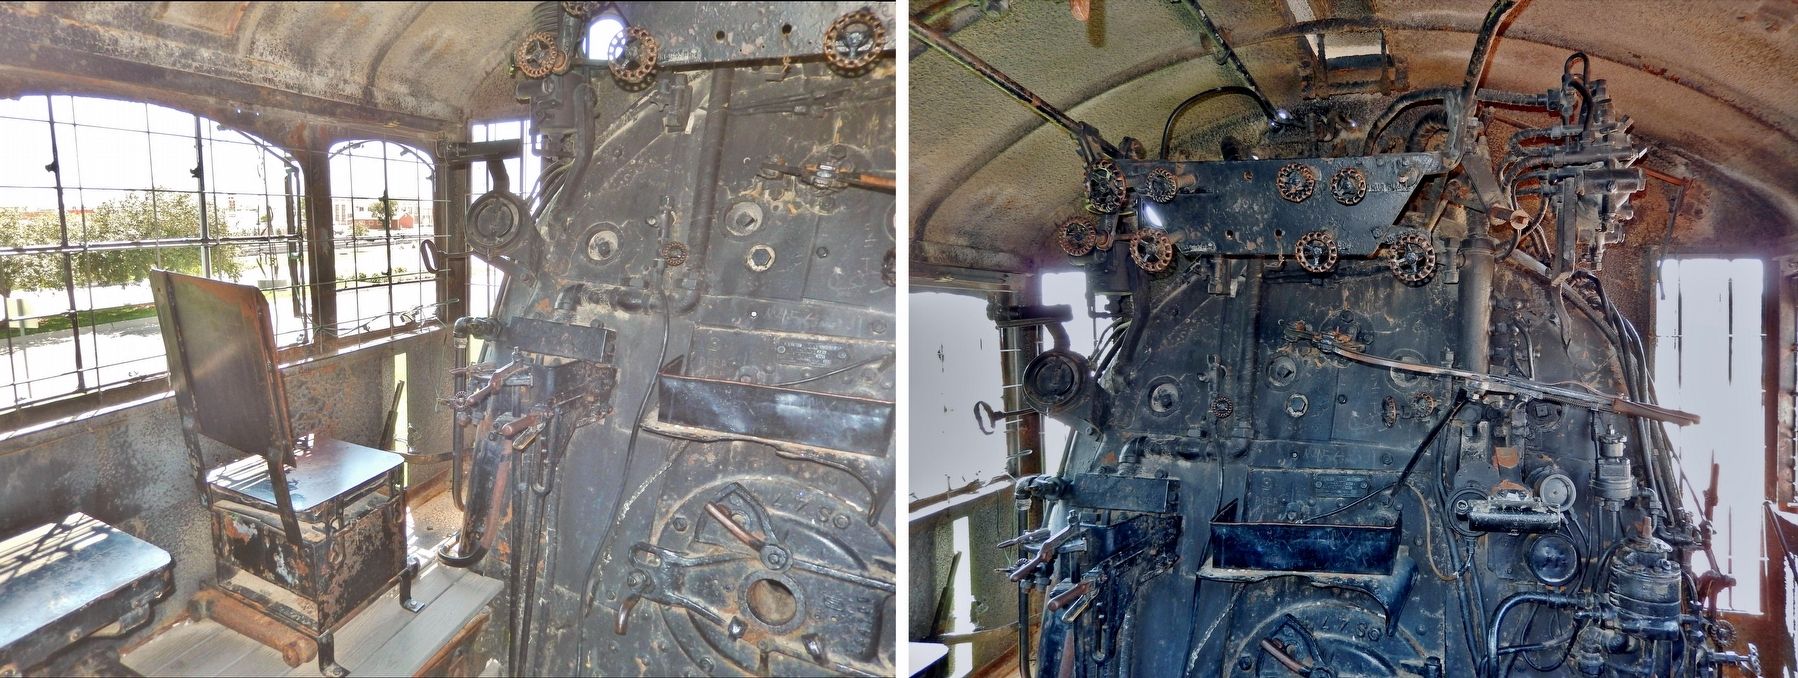 Engine No. 1139 Cab, Seat & Firebox image. Click for full size.